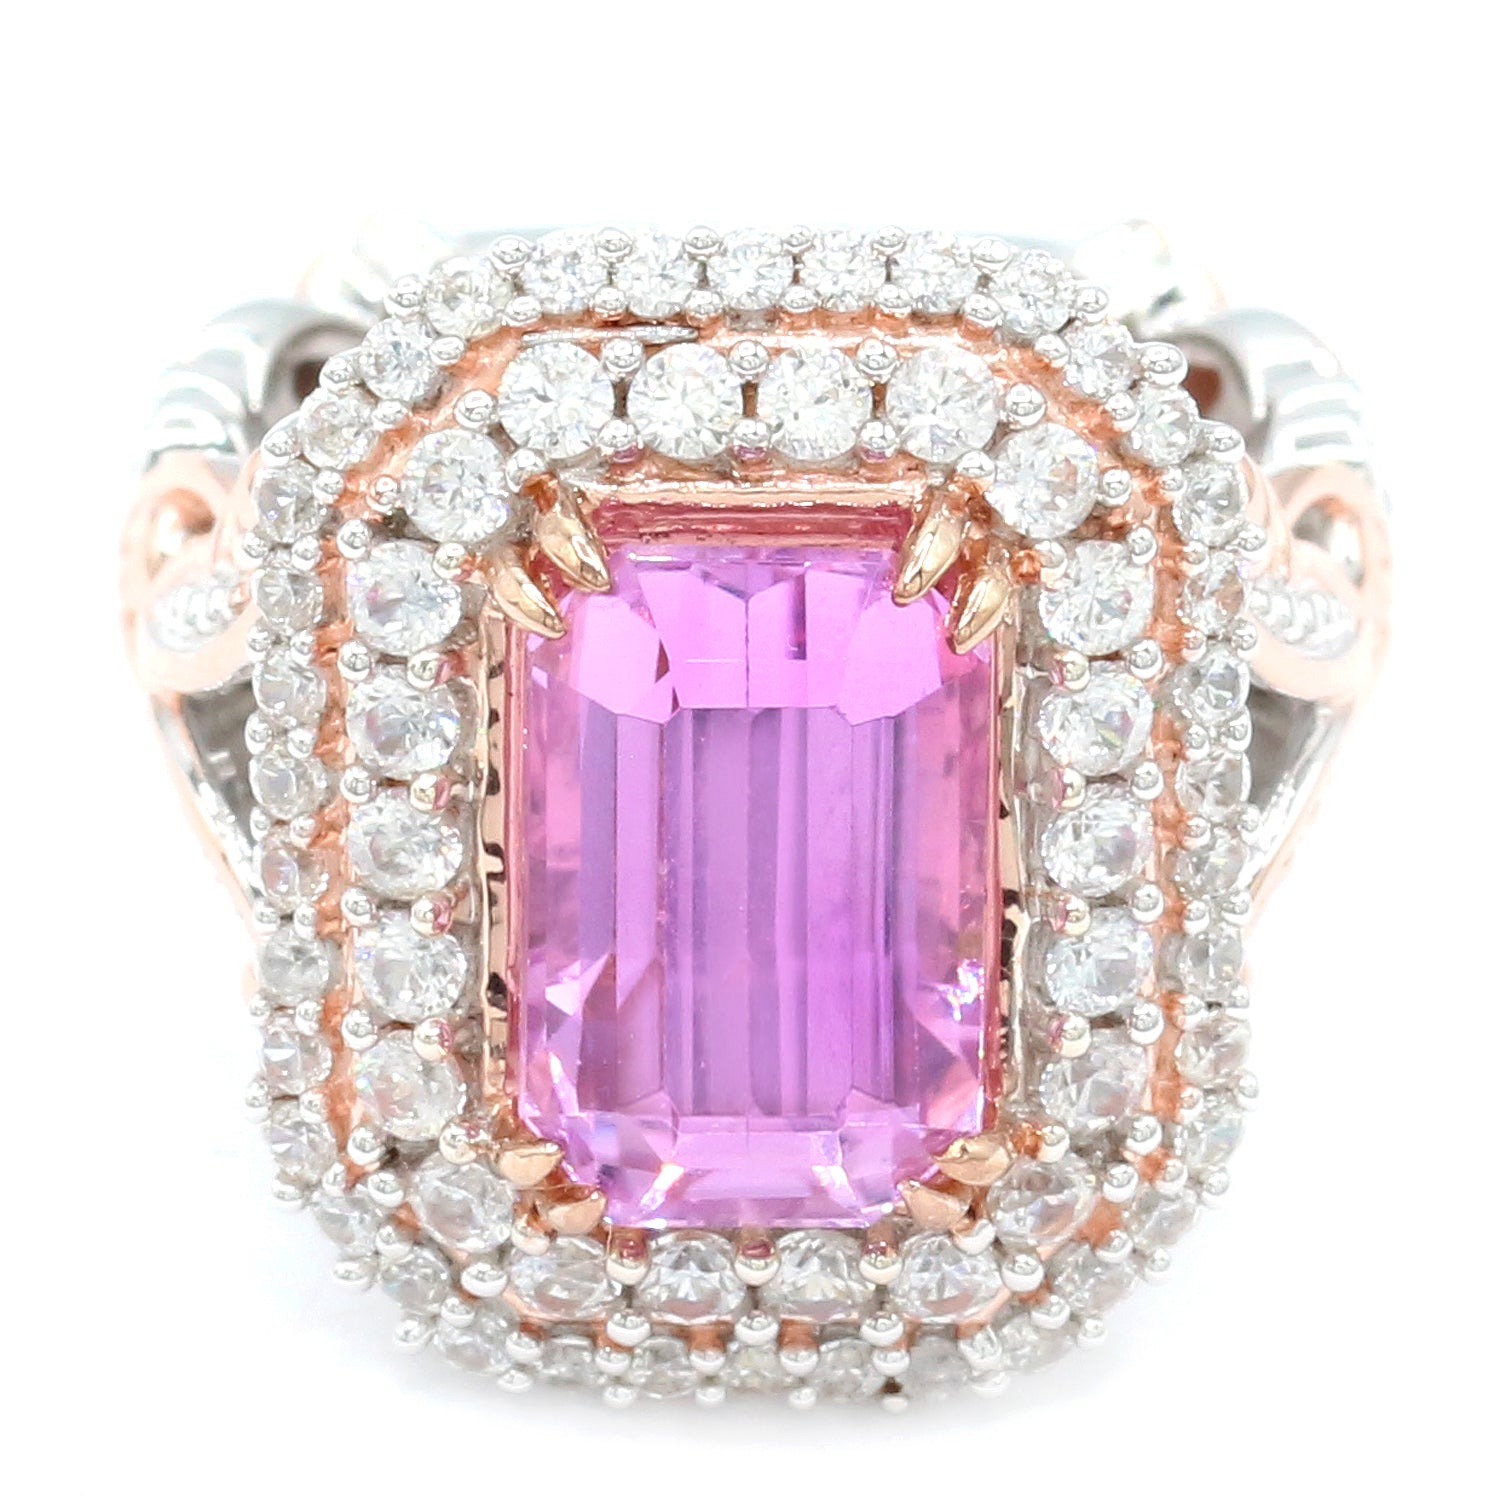 Limited Edition Gems en Vogue Luxe One-of-a-Kind 9.24ctw Kunzite & White Zircon Double Halo Ring